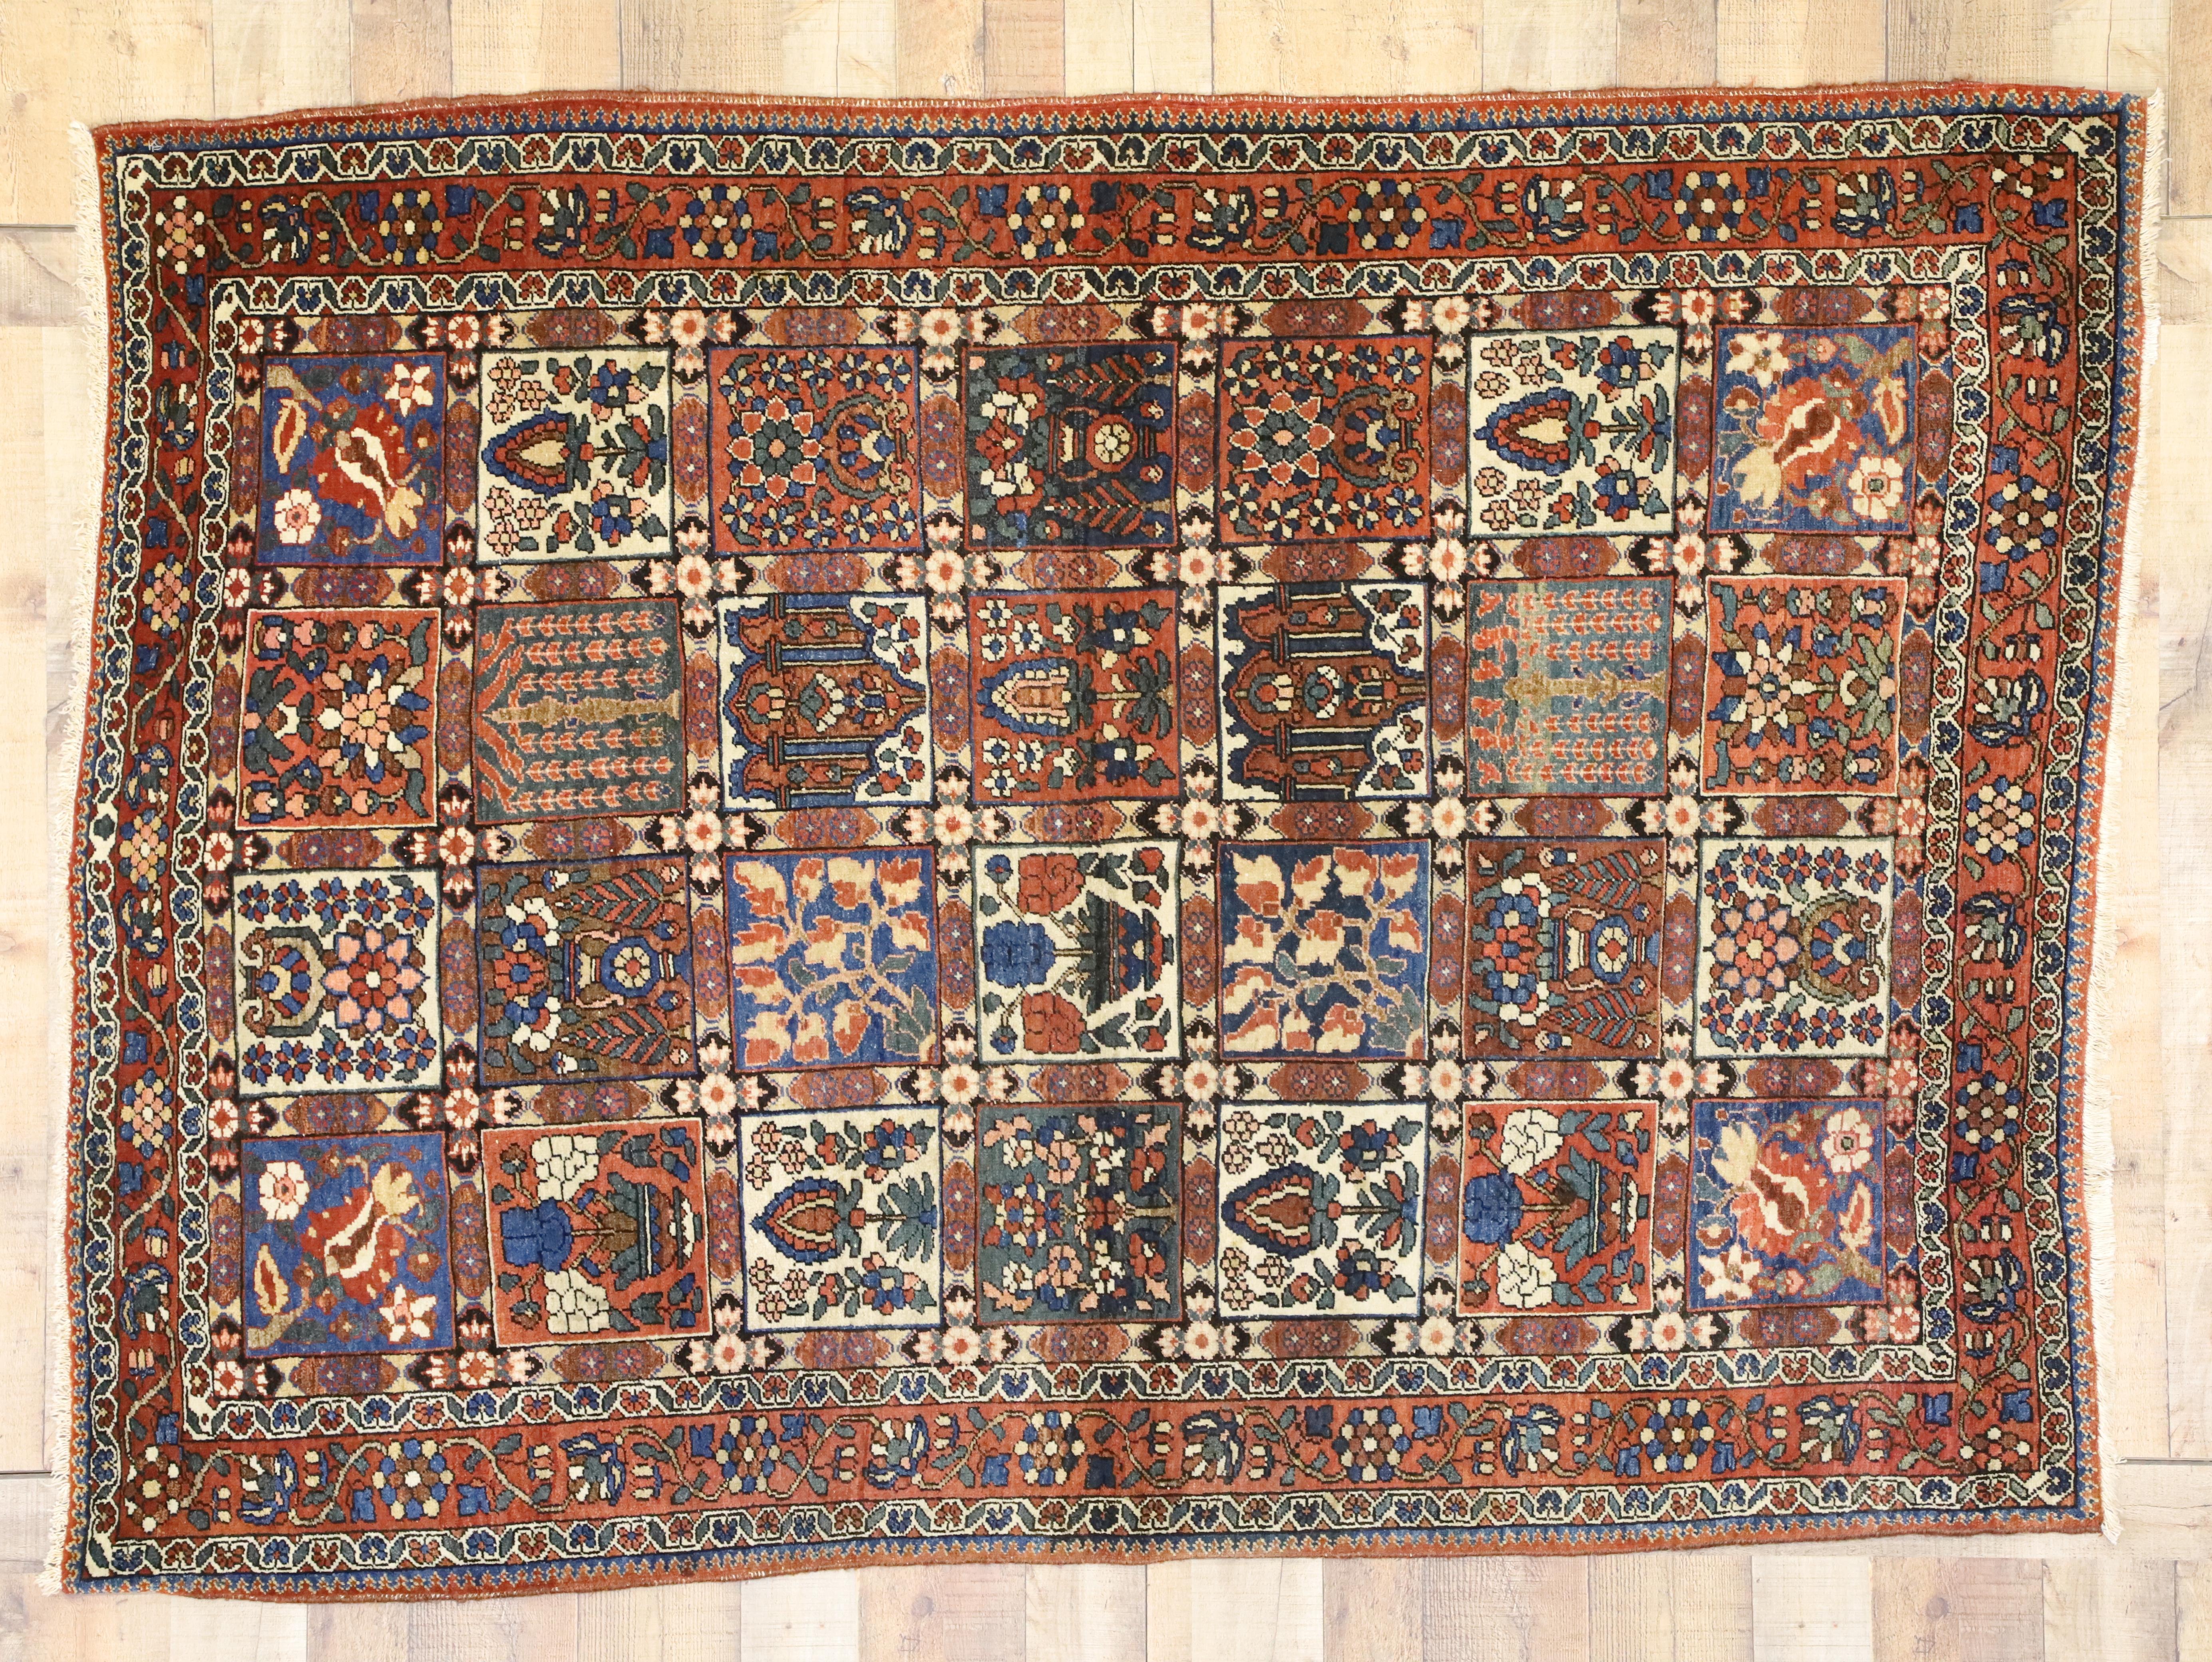 Rustic Style Antique Persian Bakhtiari Rug with Four Seasons Garden Design For Sale 1